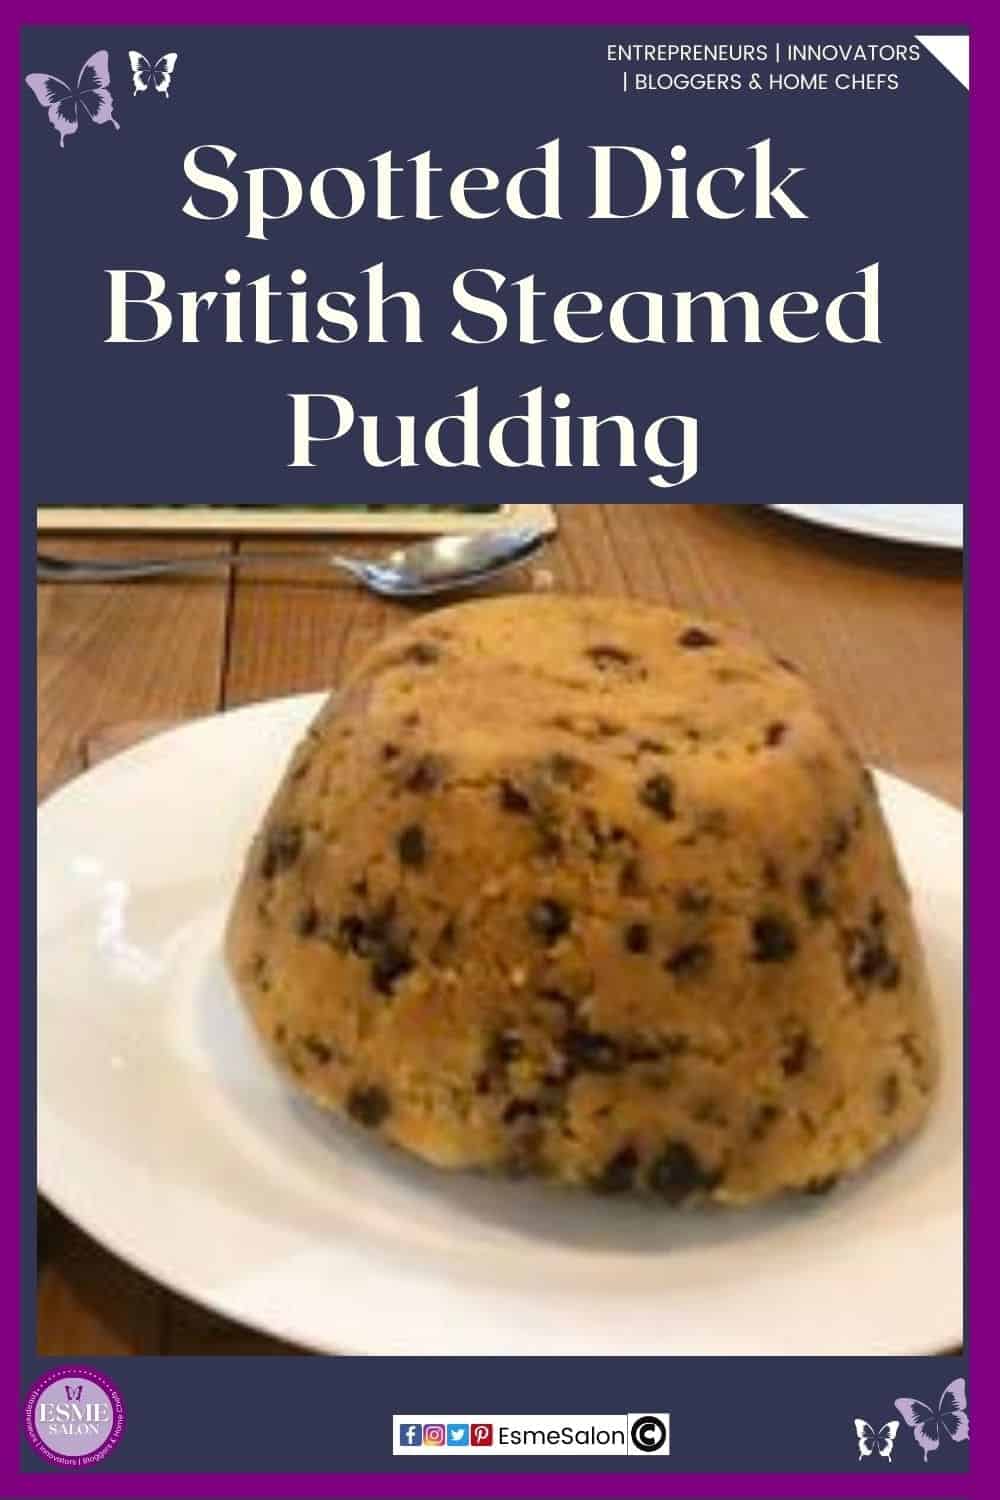 an image of a British Spotted Dick Steamed Pudding with a custard sauce